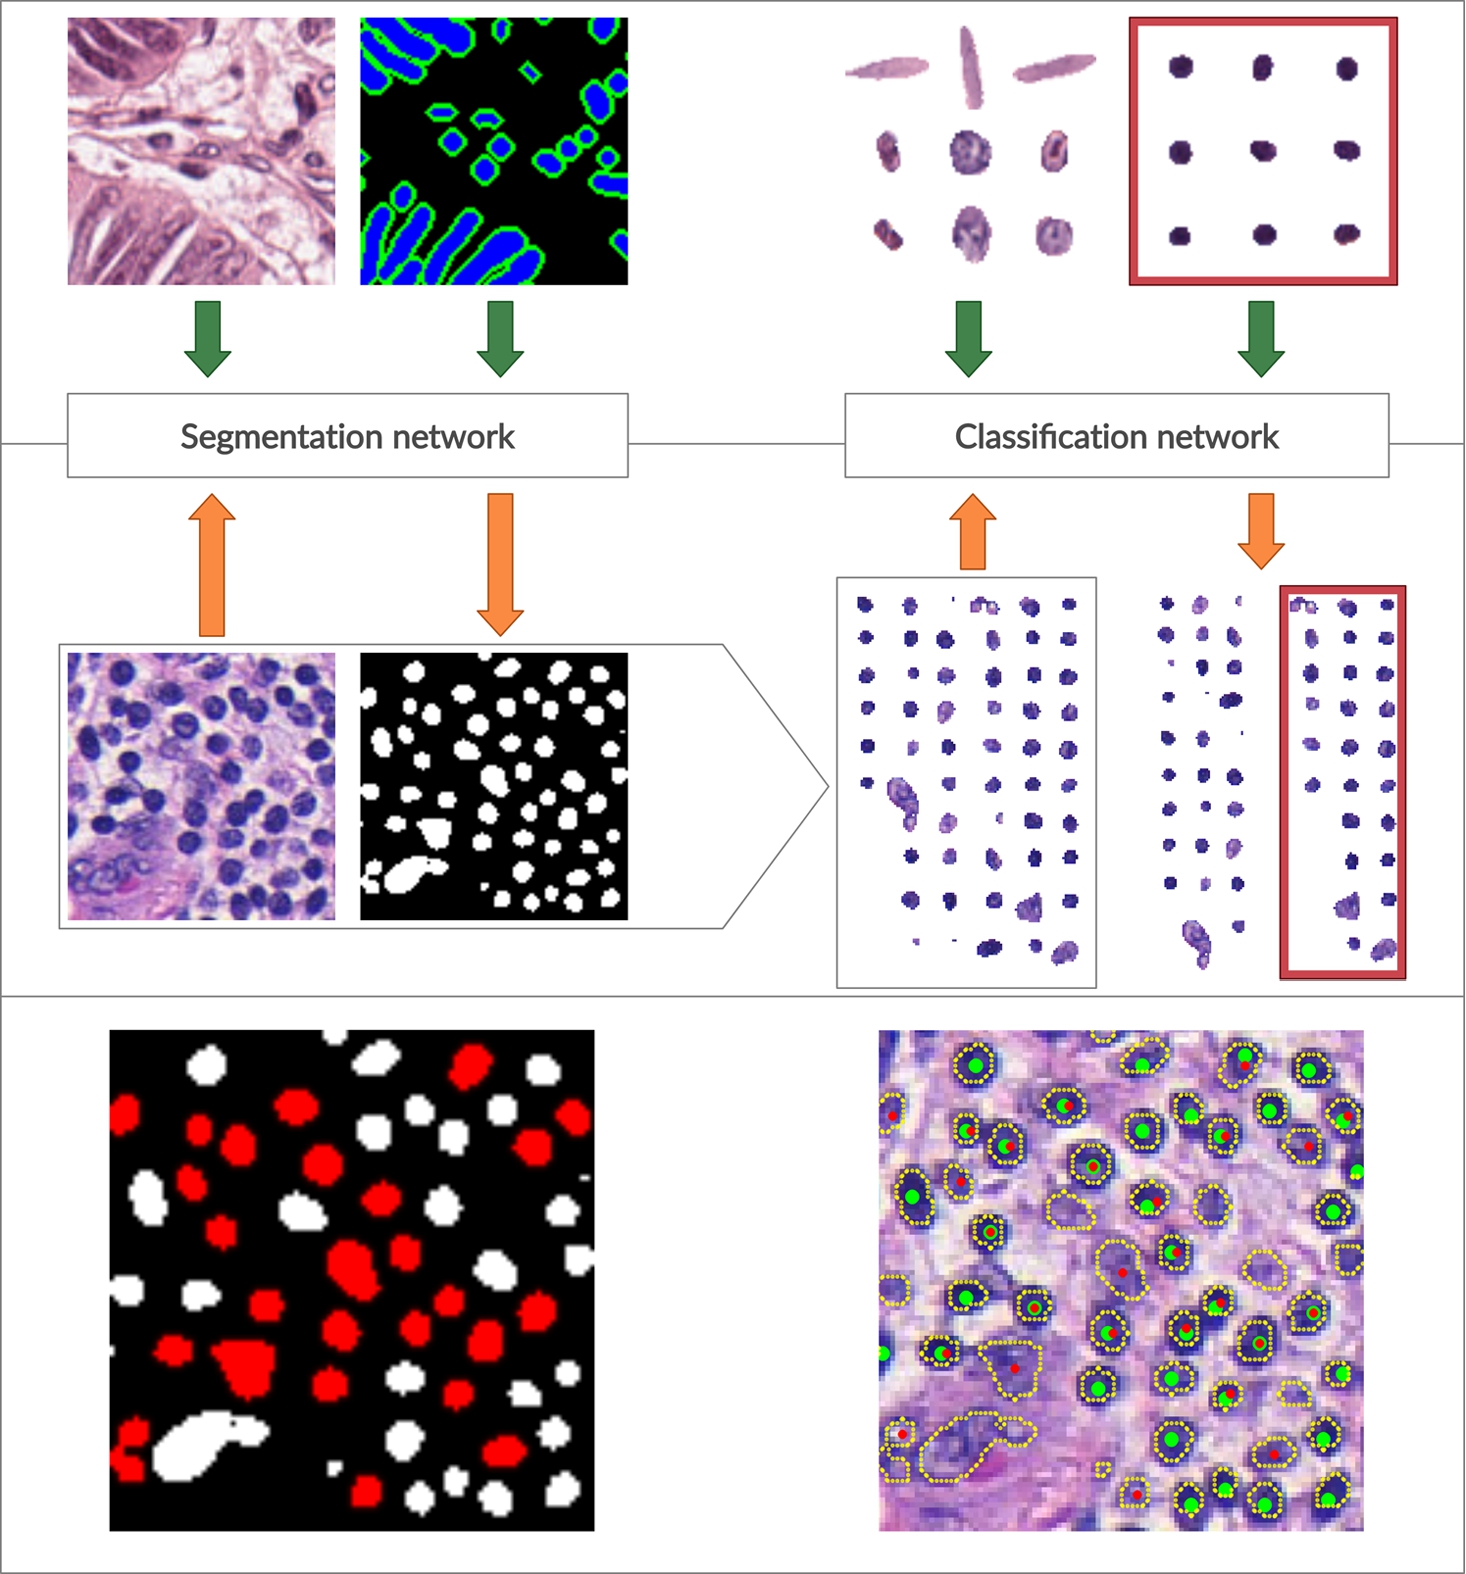 Overall schema of the proposed workflow. On top, a training phase for both segmentation and classification models is shown. The segmentation network is trained on original image patches and manually annotated ground truth images. The classification model is trained on cropped nuclei to discriminate lymphocytes (in the red box) from other nuclei. In the middle, a testing phase is shown. The trained segmentation model accepts new images and produces segmentation masks (for clarity, the active contour layer in the resulting segmentation mask is not shown). Resulting segmentation masks are used to crop out detected cell nuclei that are fed into the classifier model and sorted into lymphocytes and non-lymphocyte nuclei. In the bottom panel, on the left, we have representative segmentation results (lymphocyte nuclei are coloured in red for clarity), and on the right, we have an original image with detected nuclei contours outlined and detected lymphocyte nuclei depicted with red dots. Green dots indicate lymphocyte ground truth.